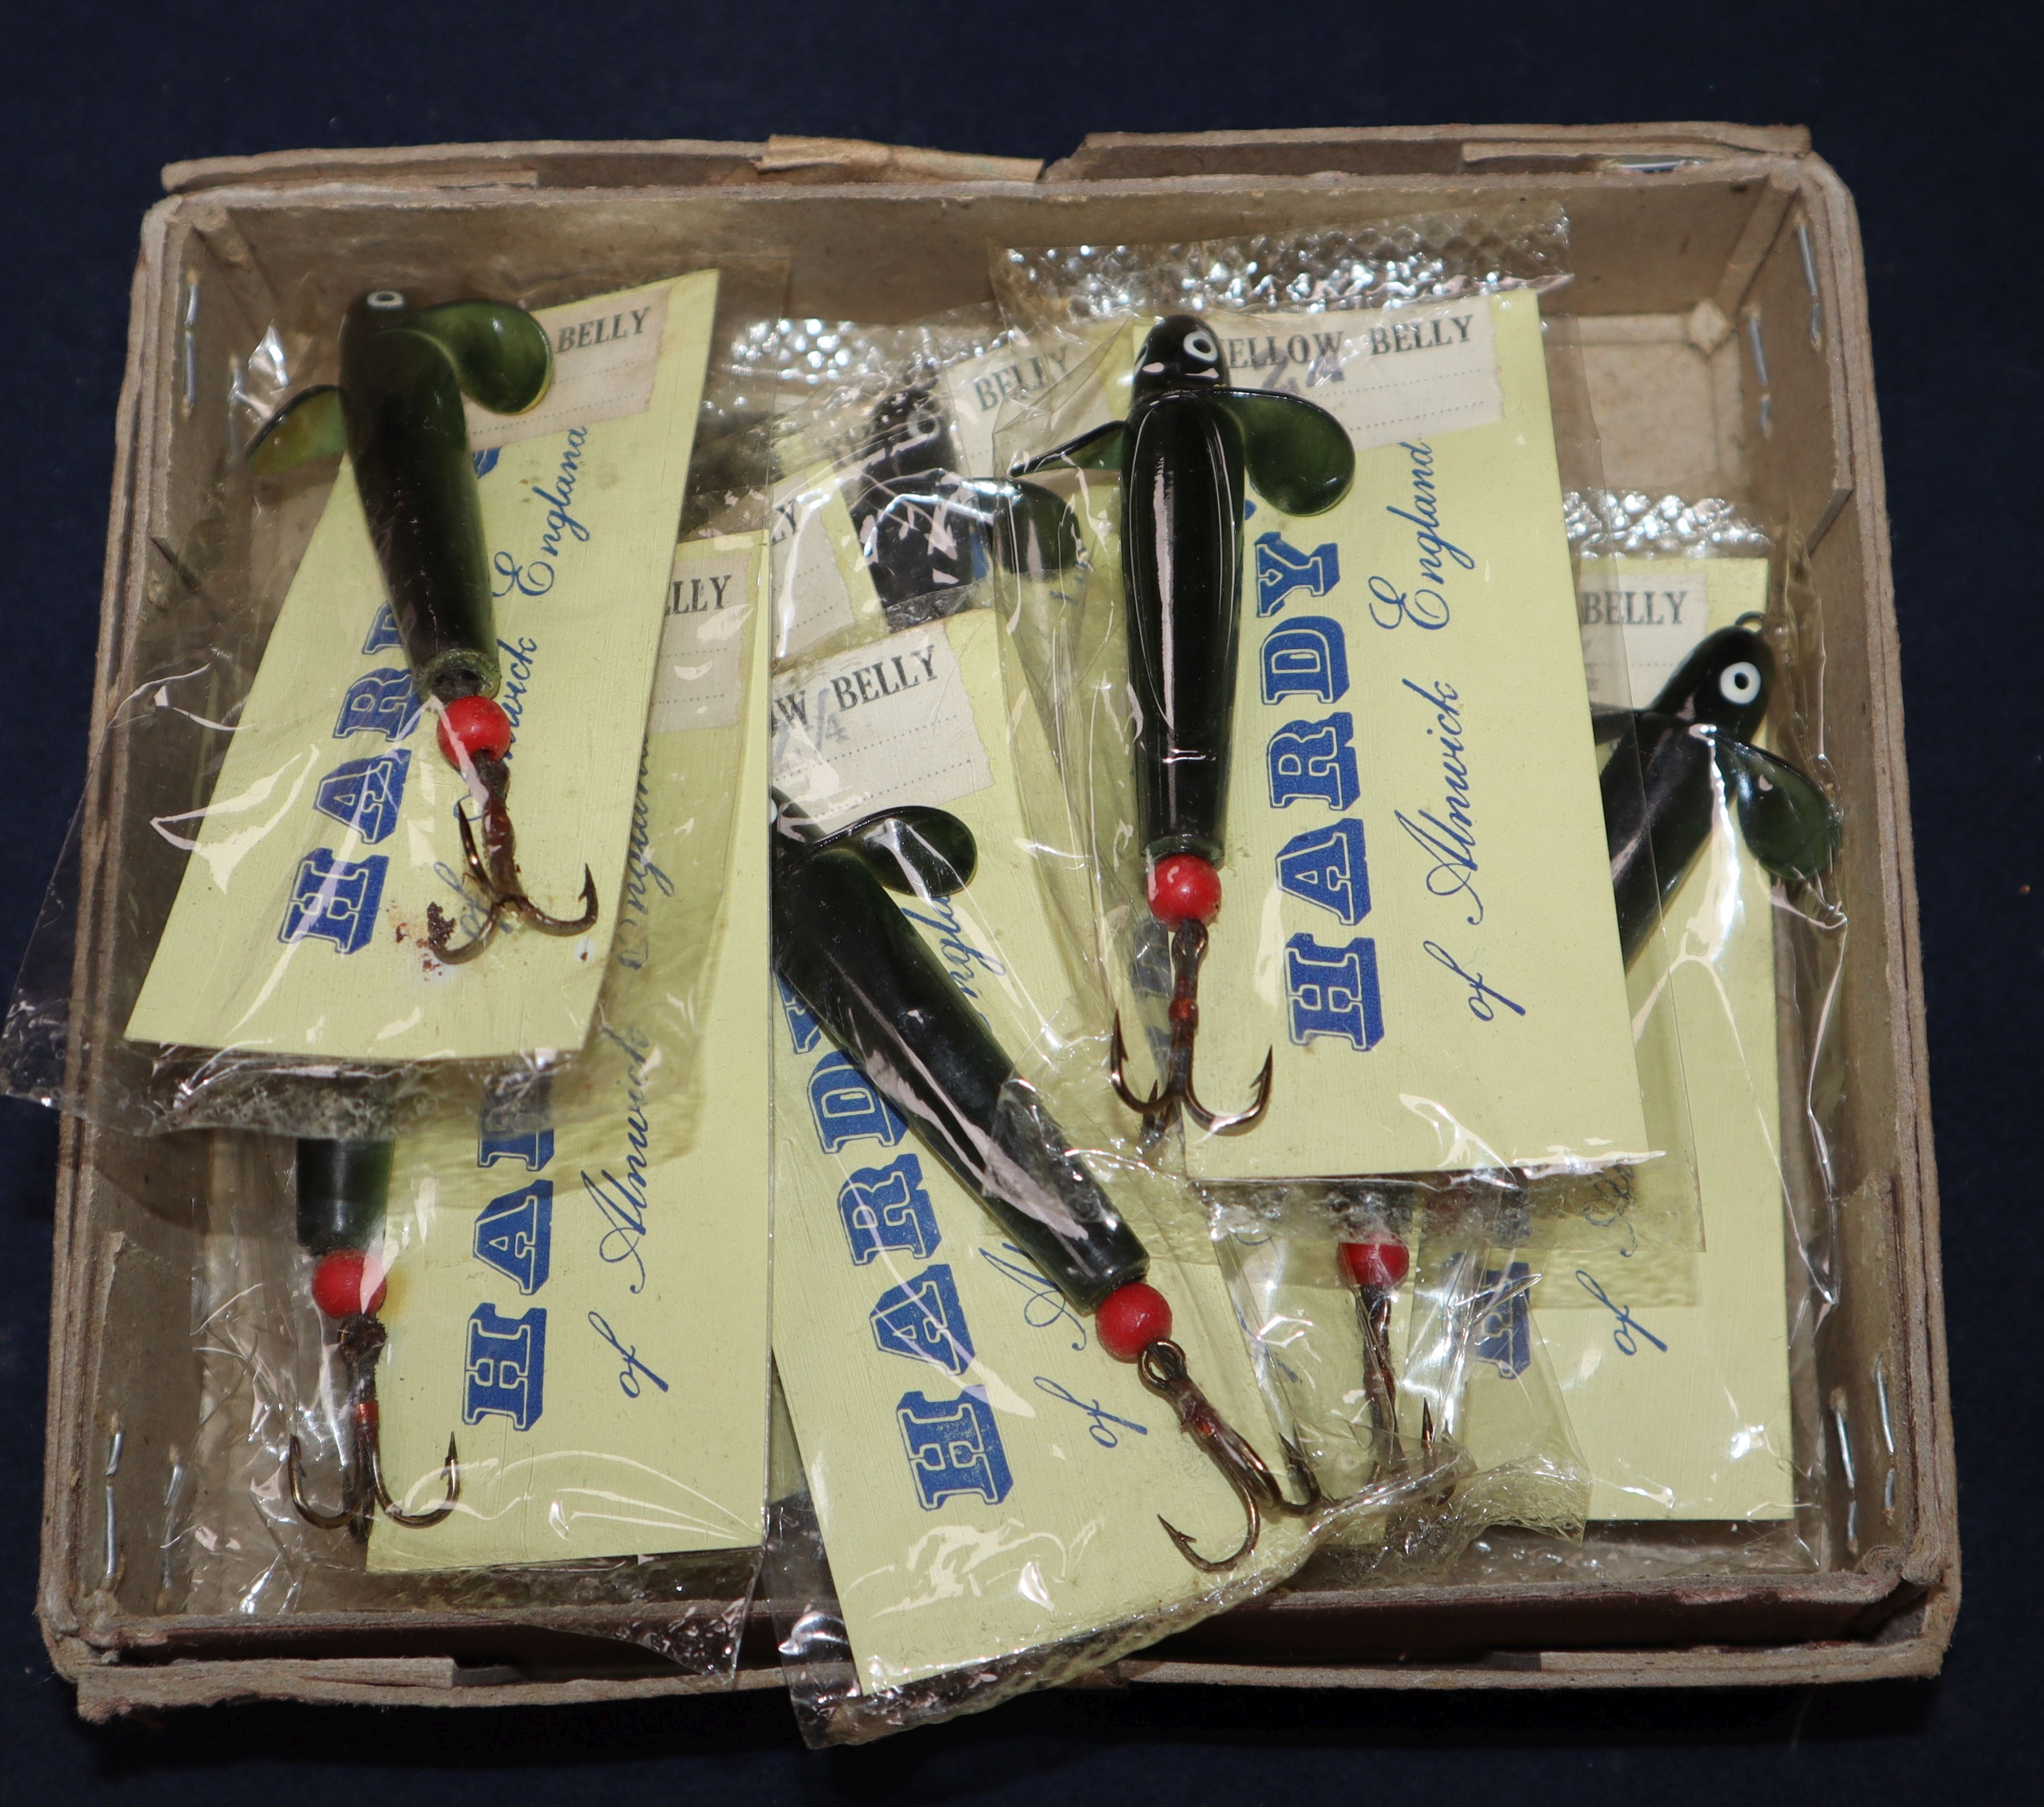 Two boxes of vintage Hardy 'Yellow Belly' lures in original carded cellophane, size 1 and 2.25in.